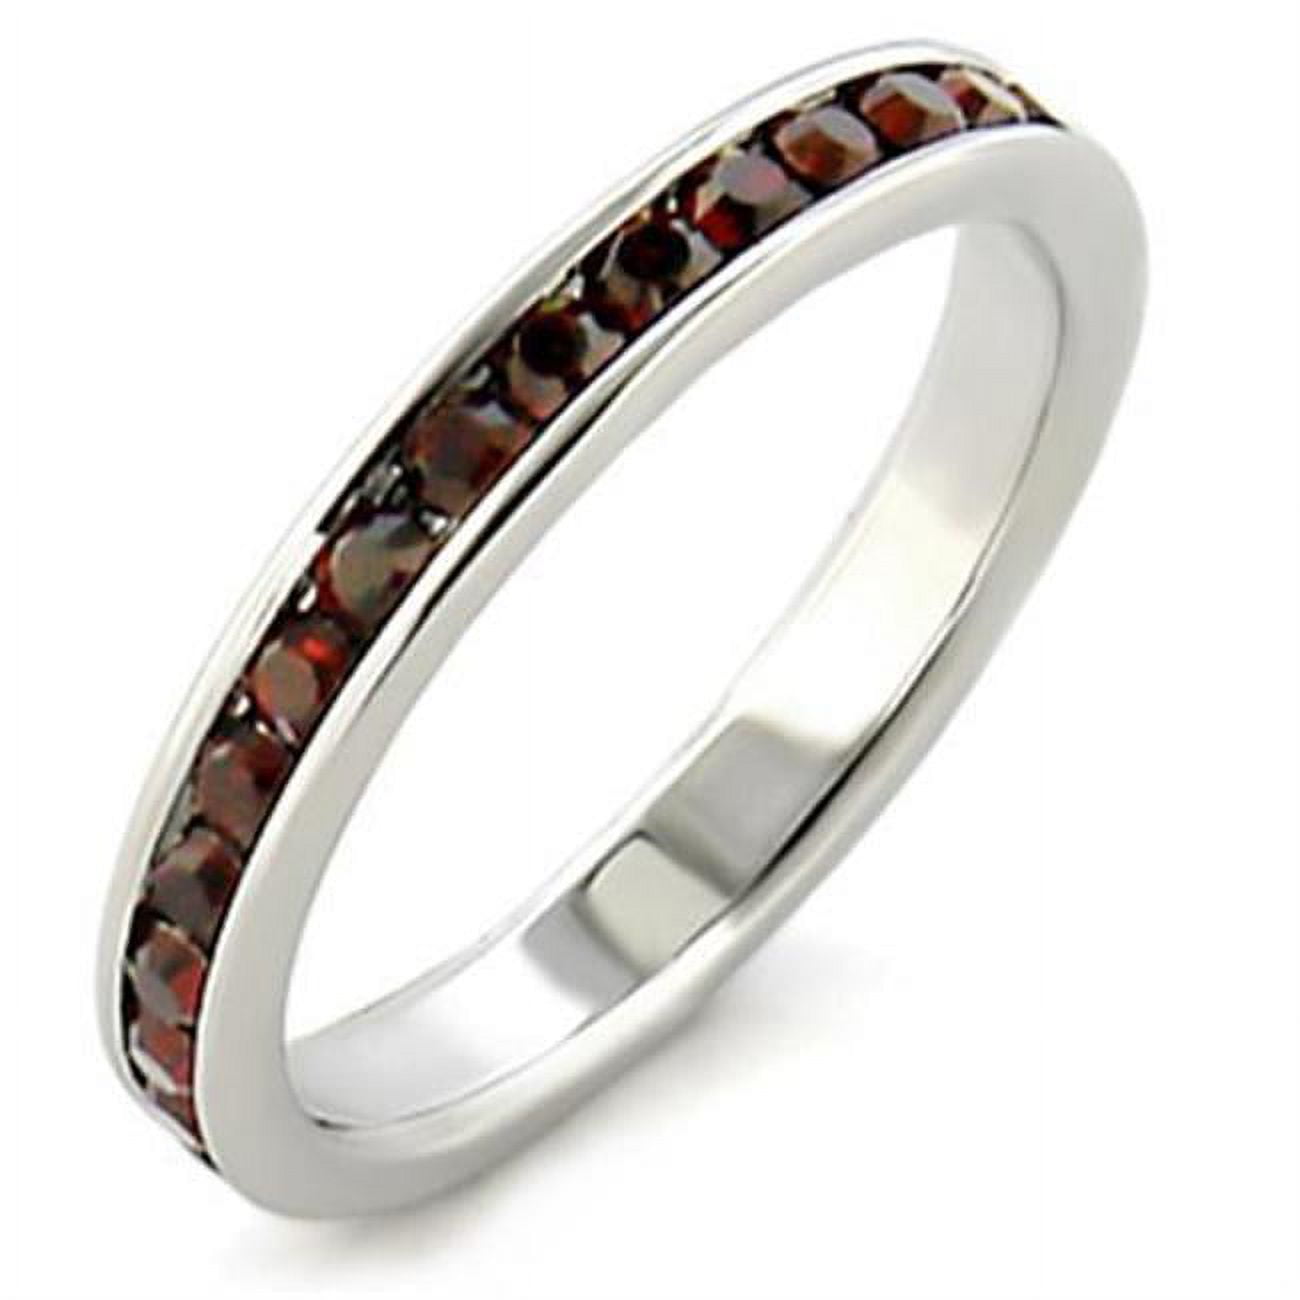 Picture of Alamode LOA509-7 Women High-Polished 925 Sterling Silver Ring with Top Grade Crystal in Garnet - Size 7